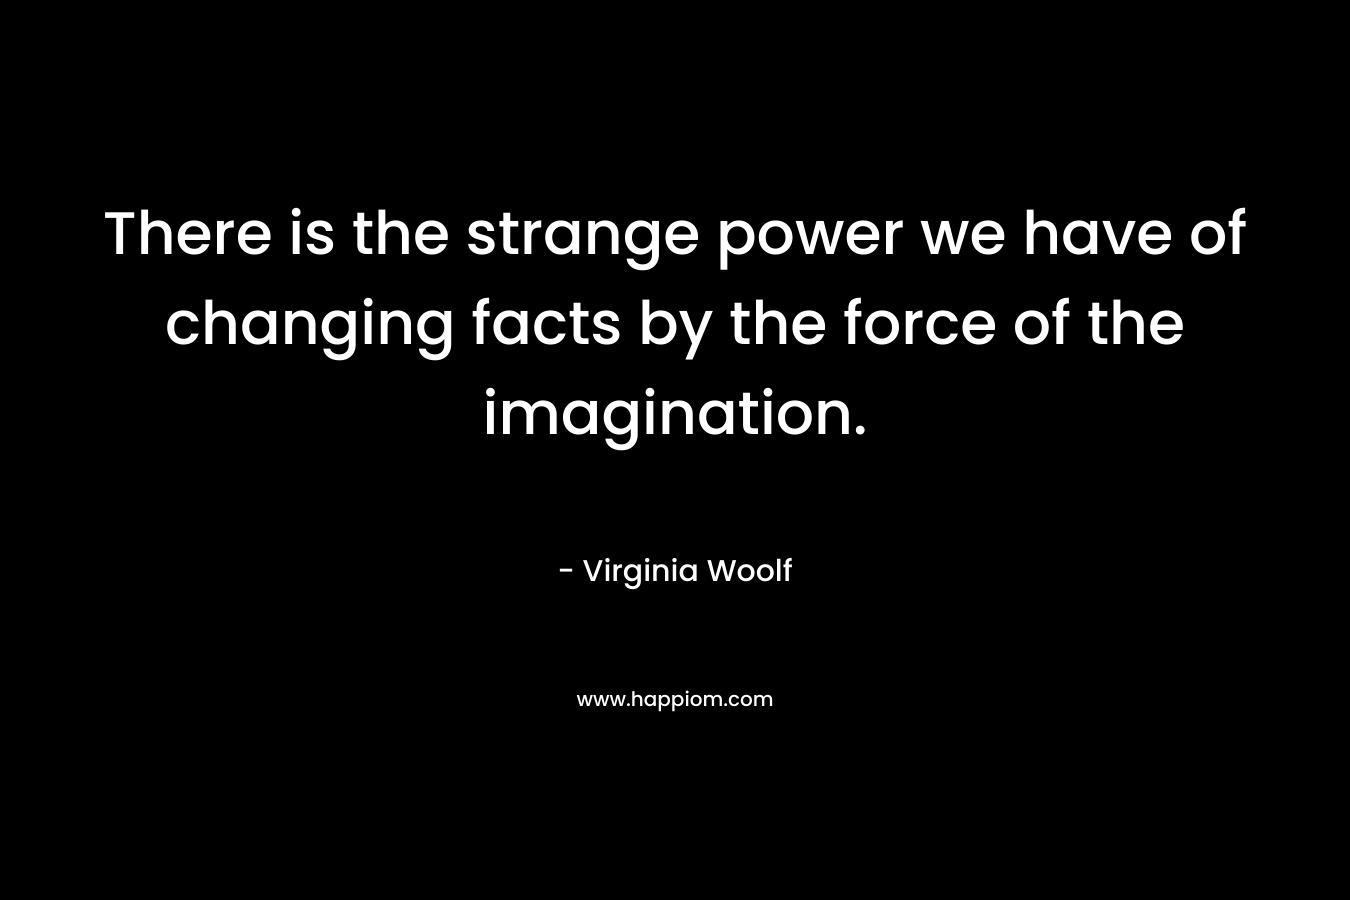 There is the strange power we have of changing facts by the force of the imagination.